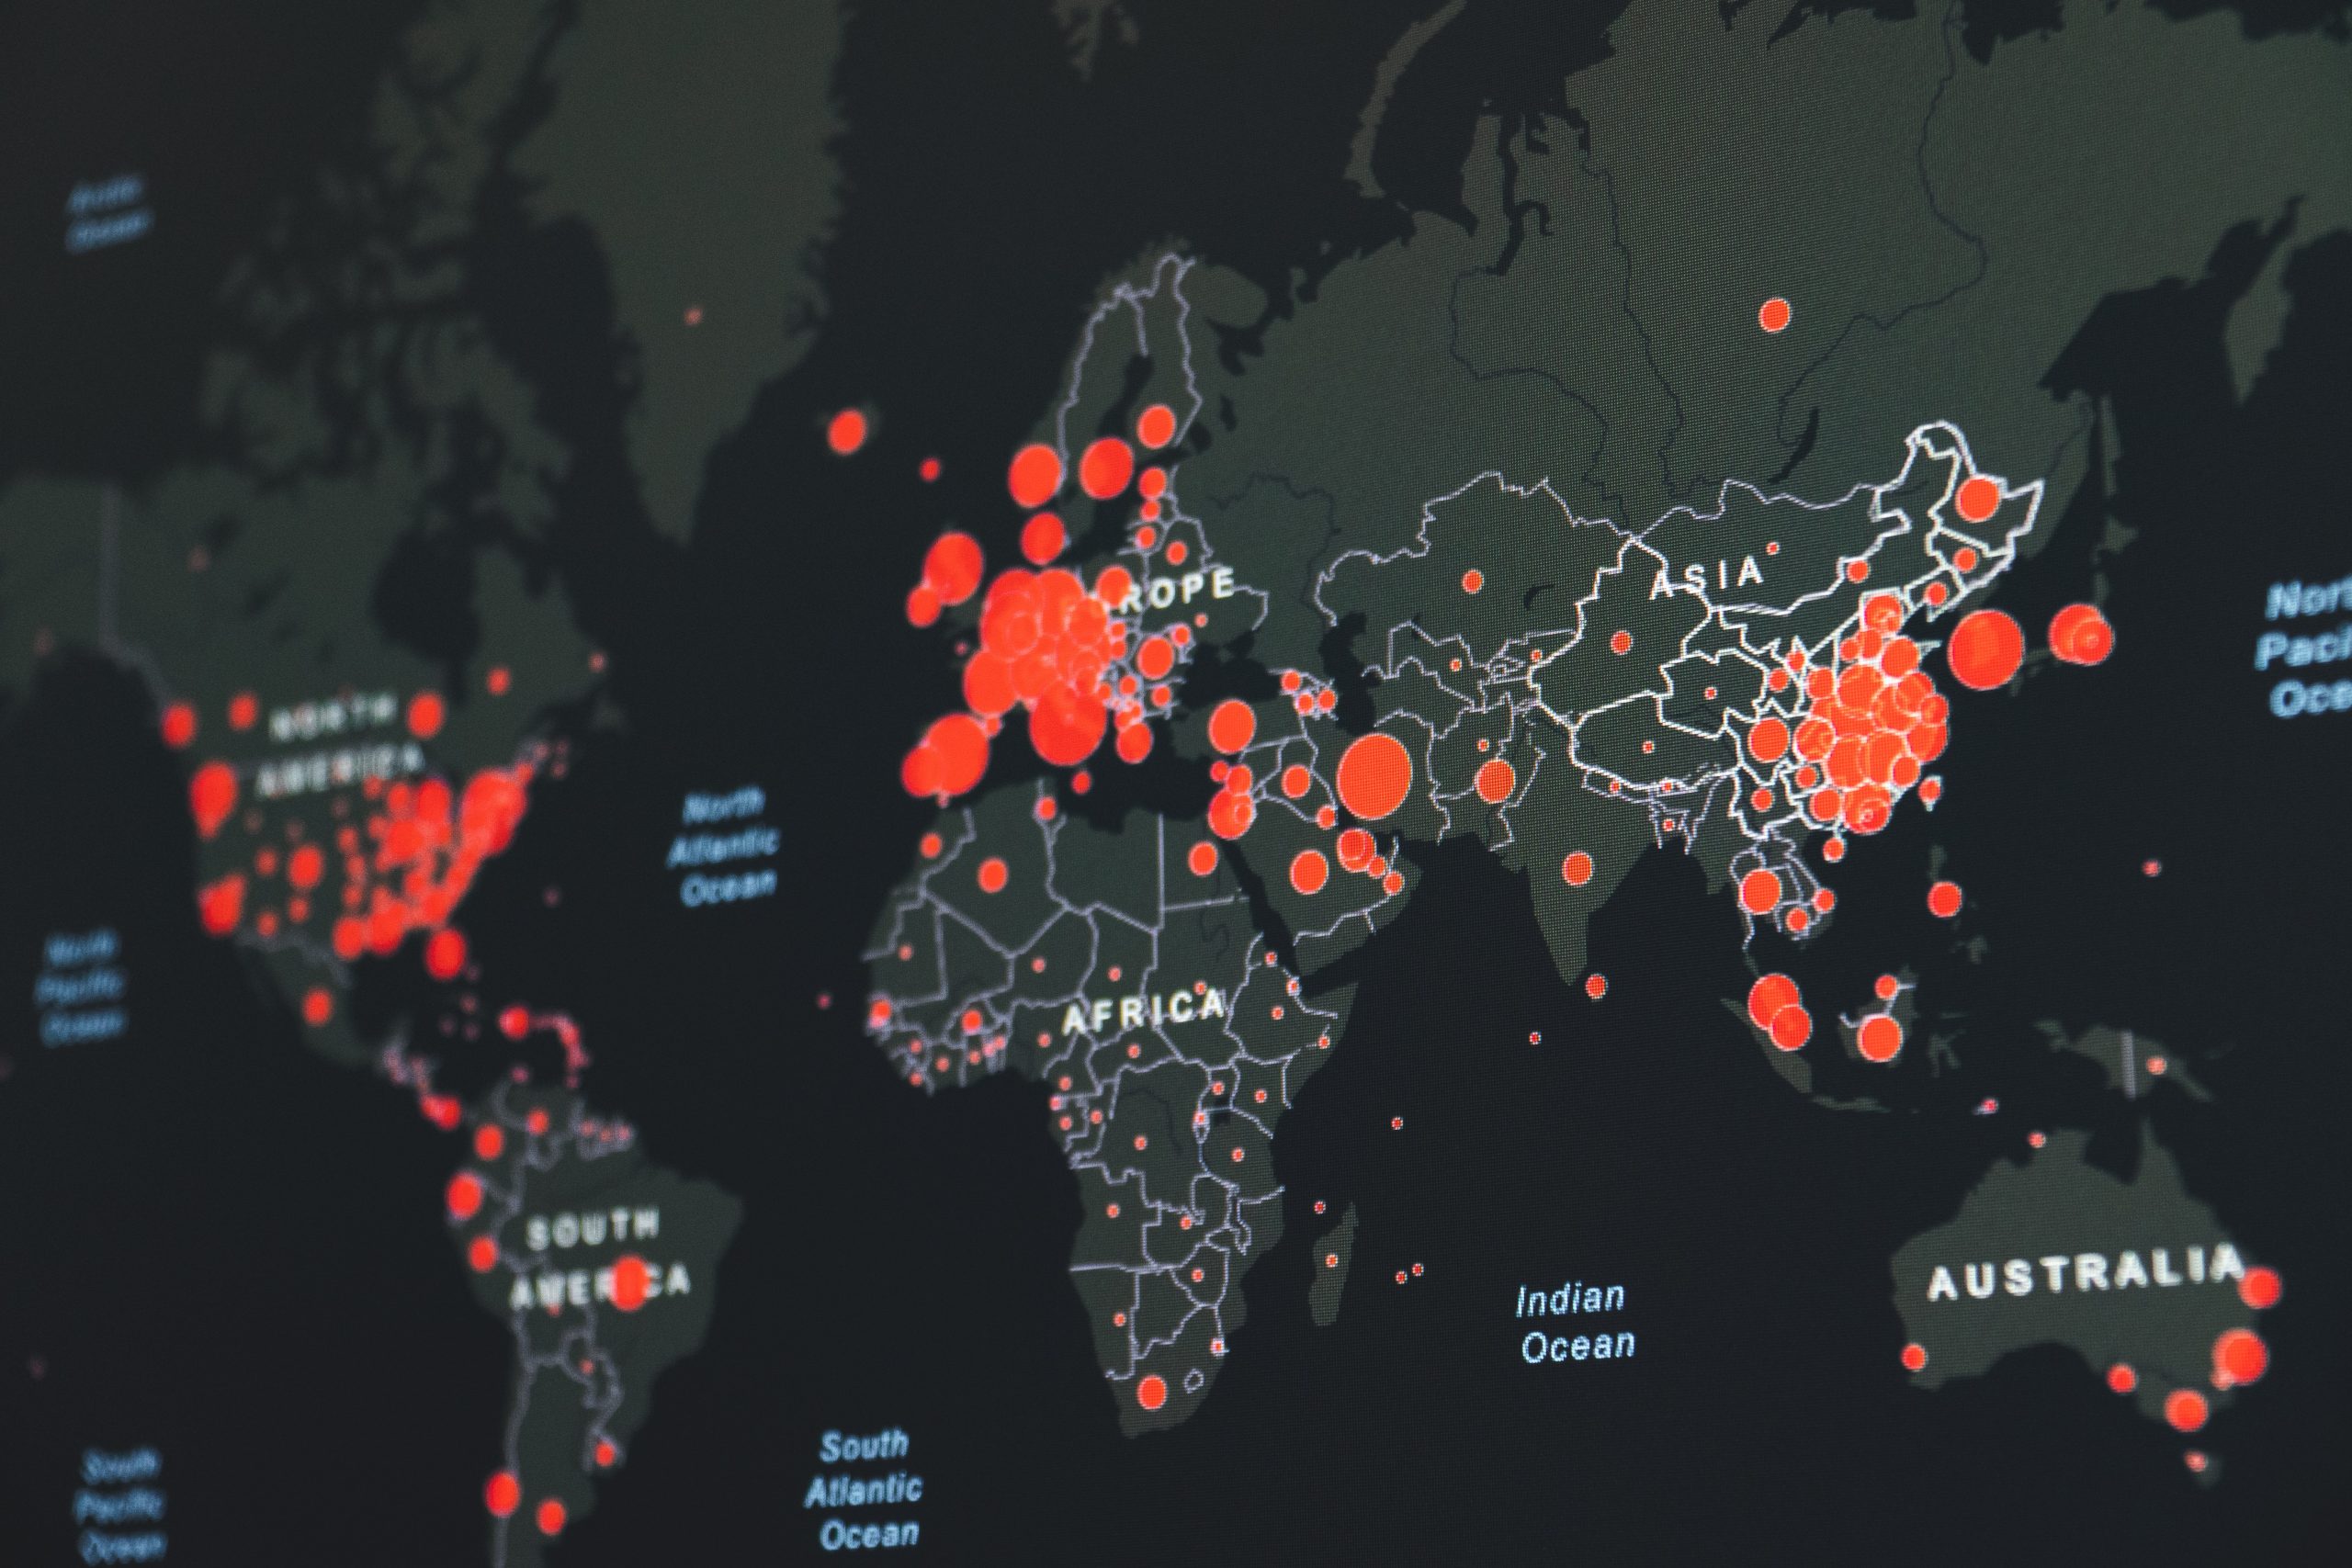 A digital map shows hotspots for Covid-19 infection rates across the globe. Hospots are highlighted with red dots and the map is in black and grey